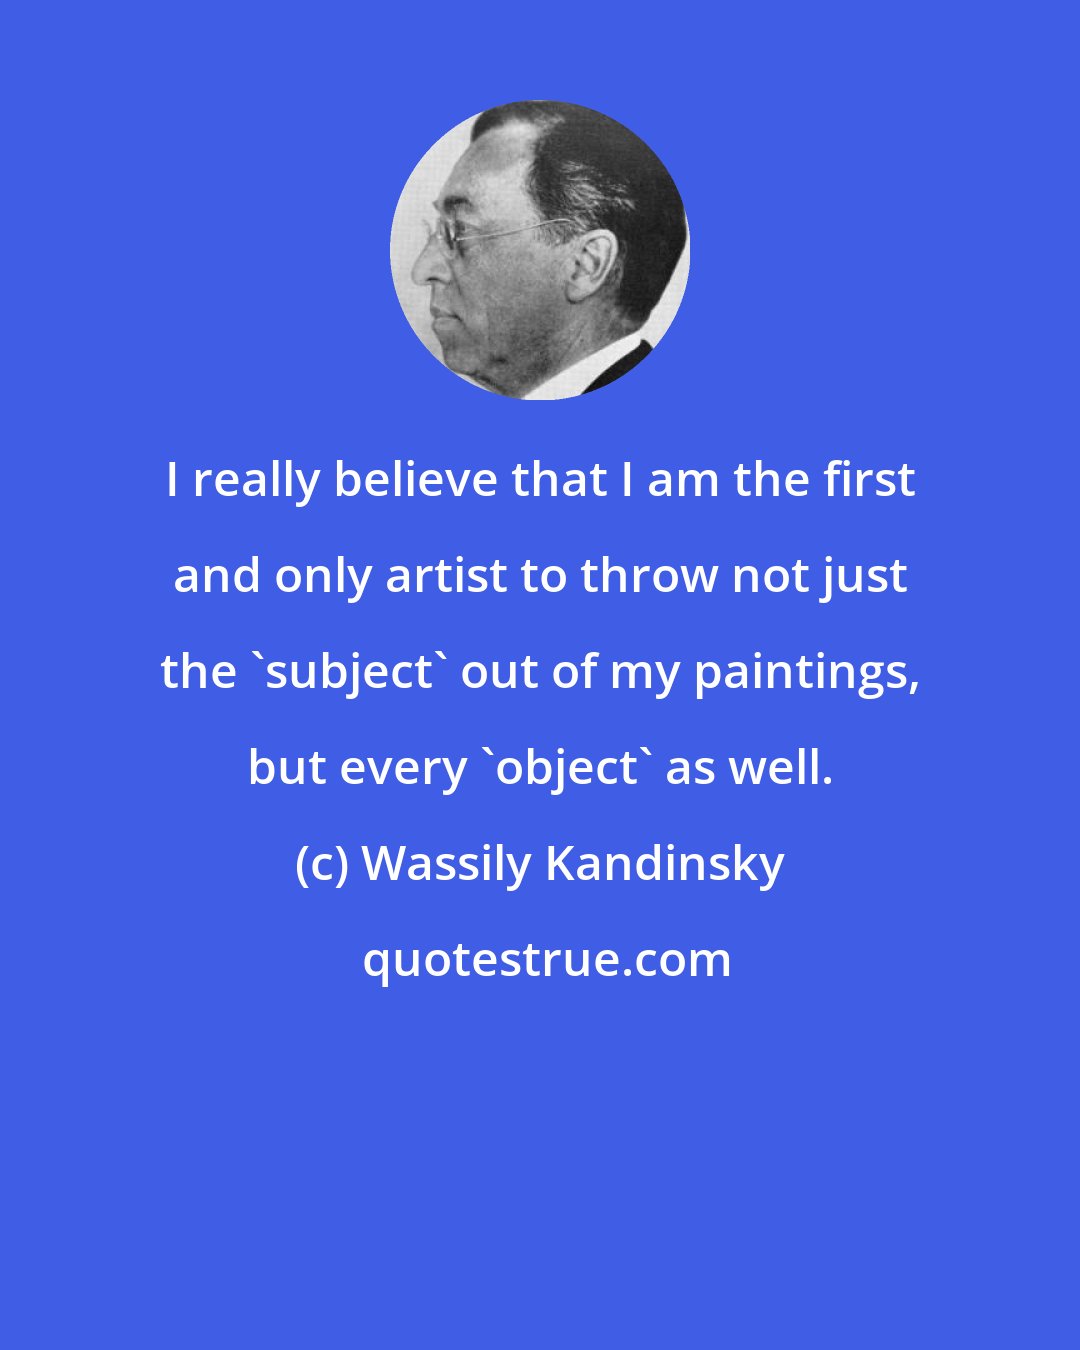 Wassily Kandinsky: I really believe that I am the first and only artist to throw not just the 'subject' out of my paintings, but every 'object' as well.